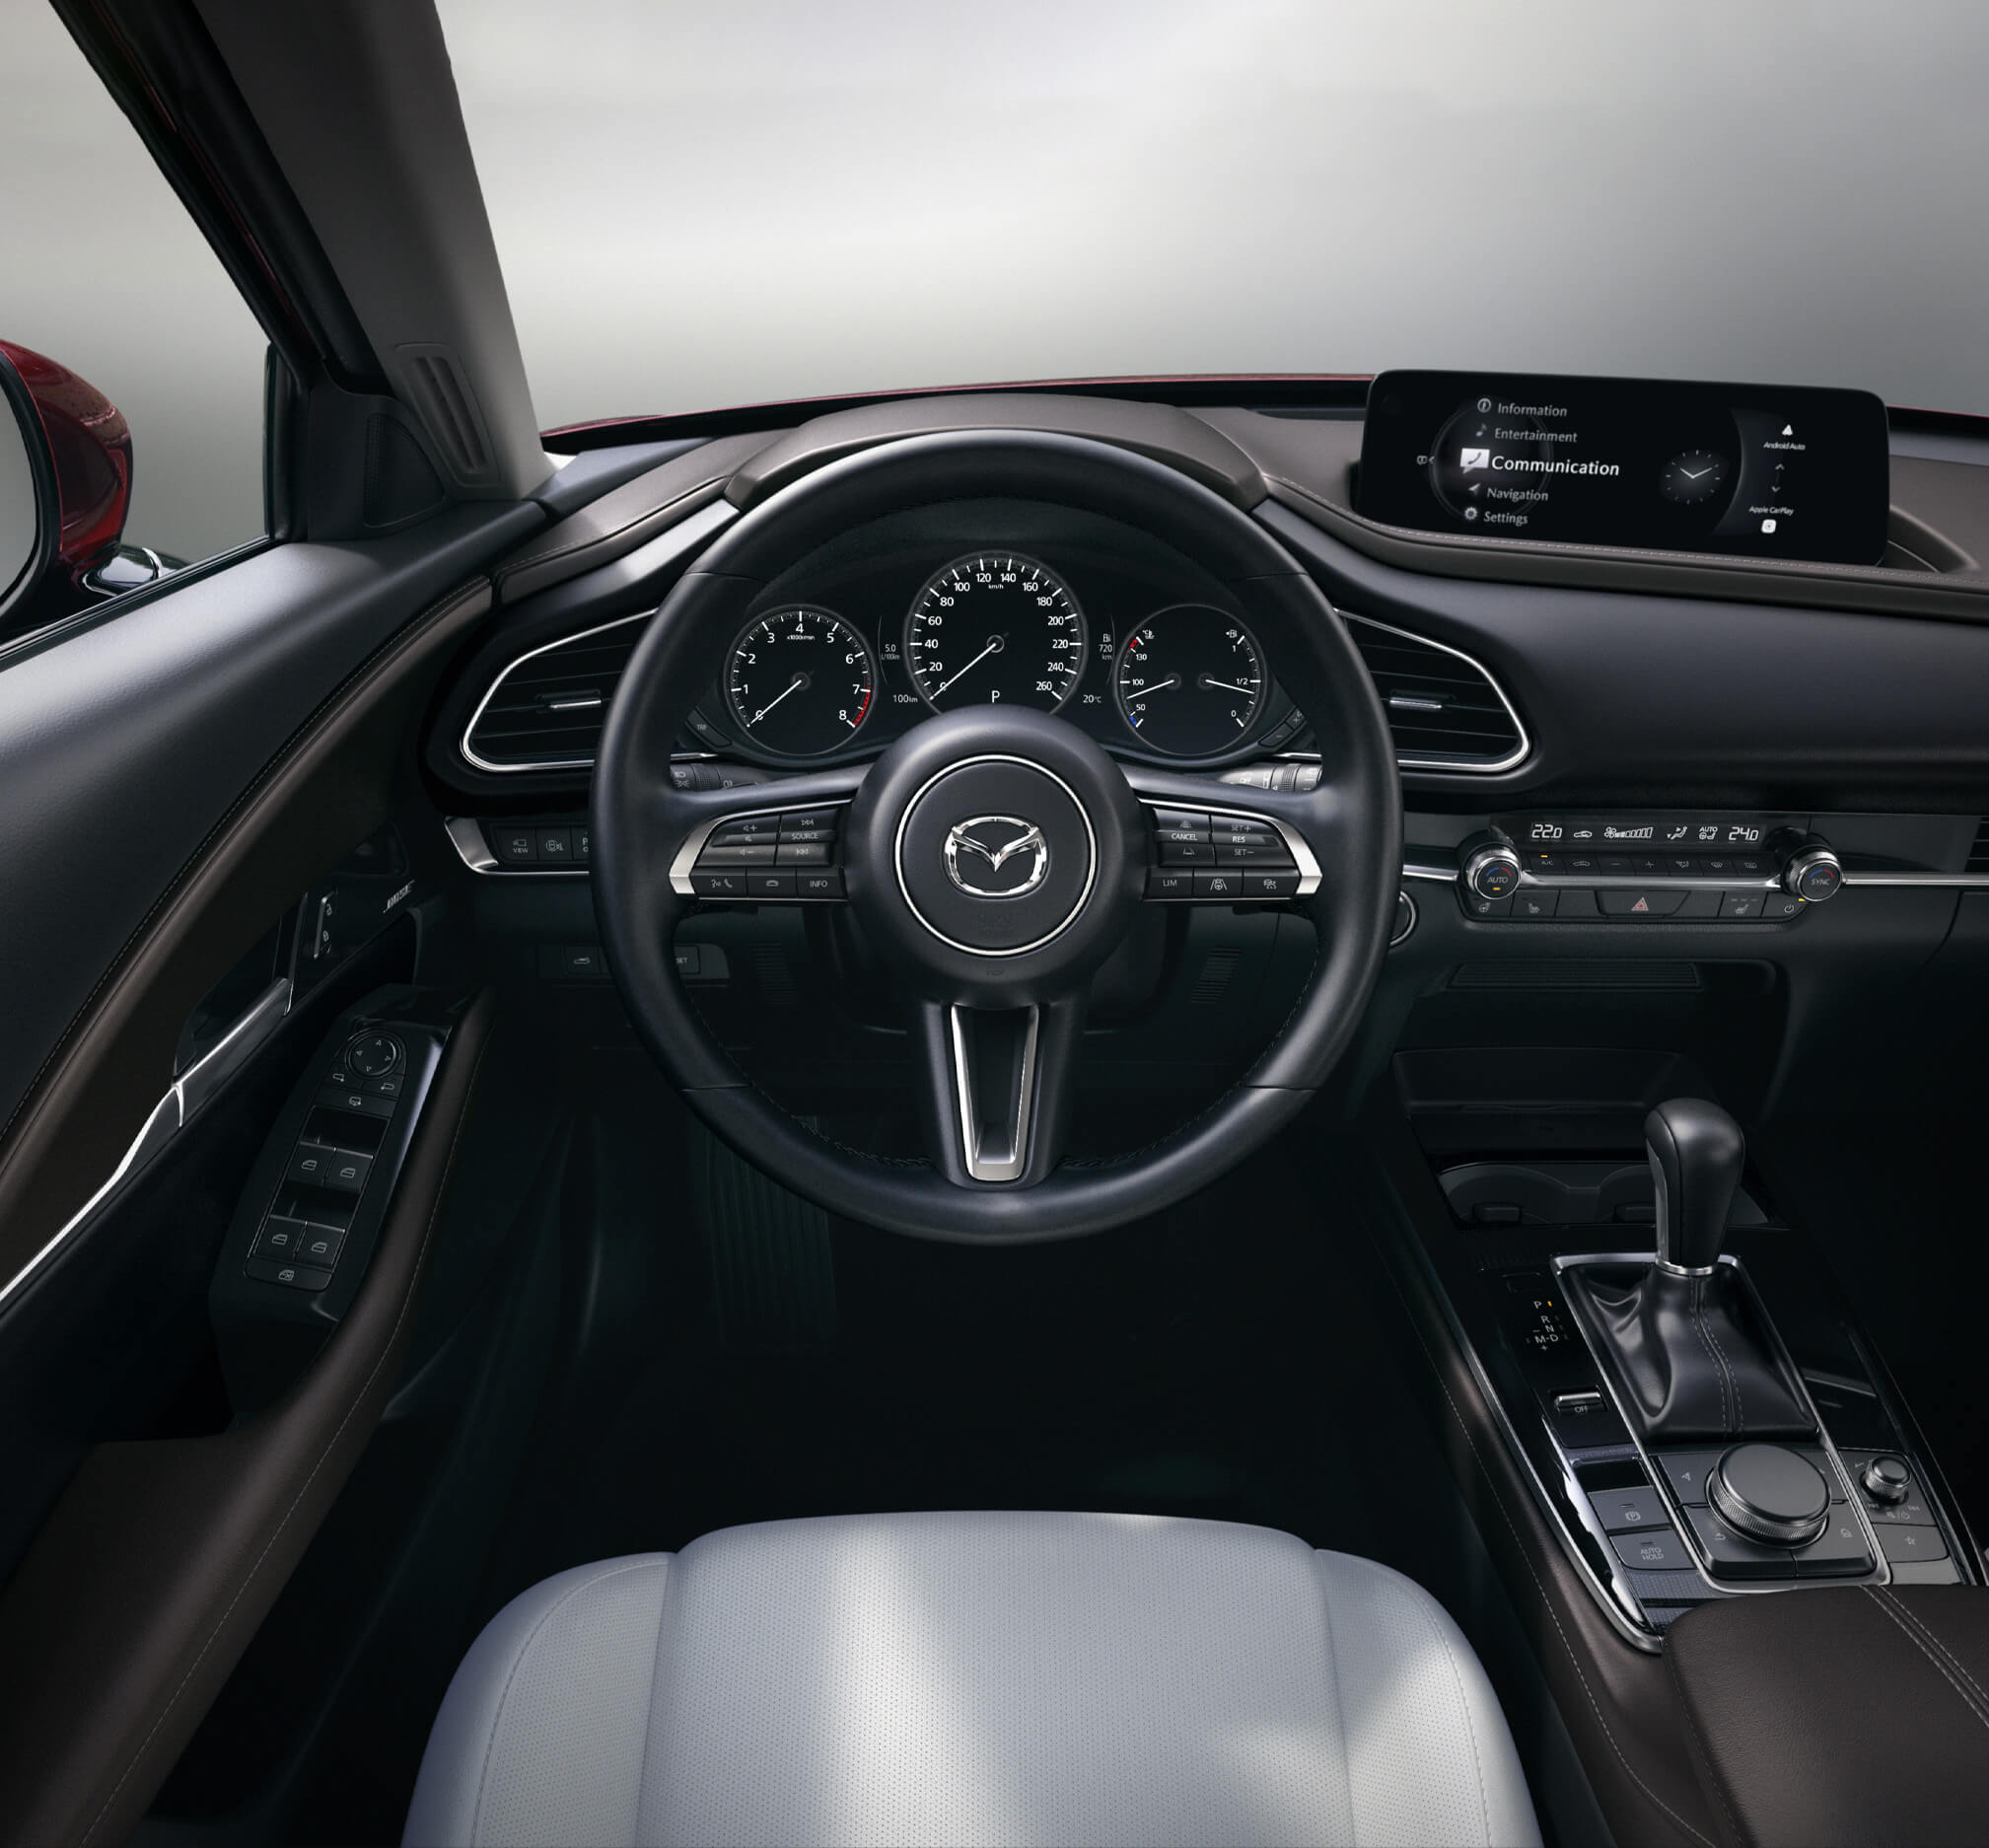 https://staging.mazda-brochures.com/test-tracking/mazdacx30/de-at/assets/images/steering-wheel-of-the-madza-cx-30-with-beautiful-details.jpg